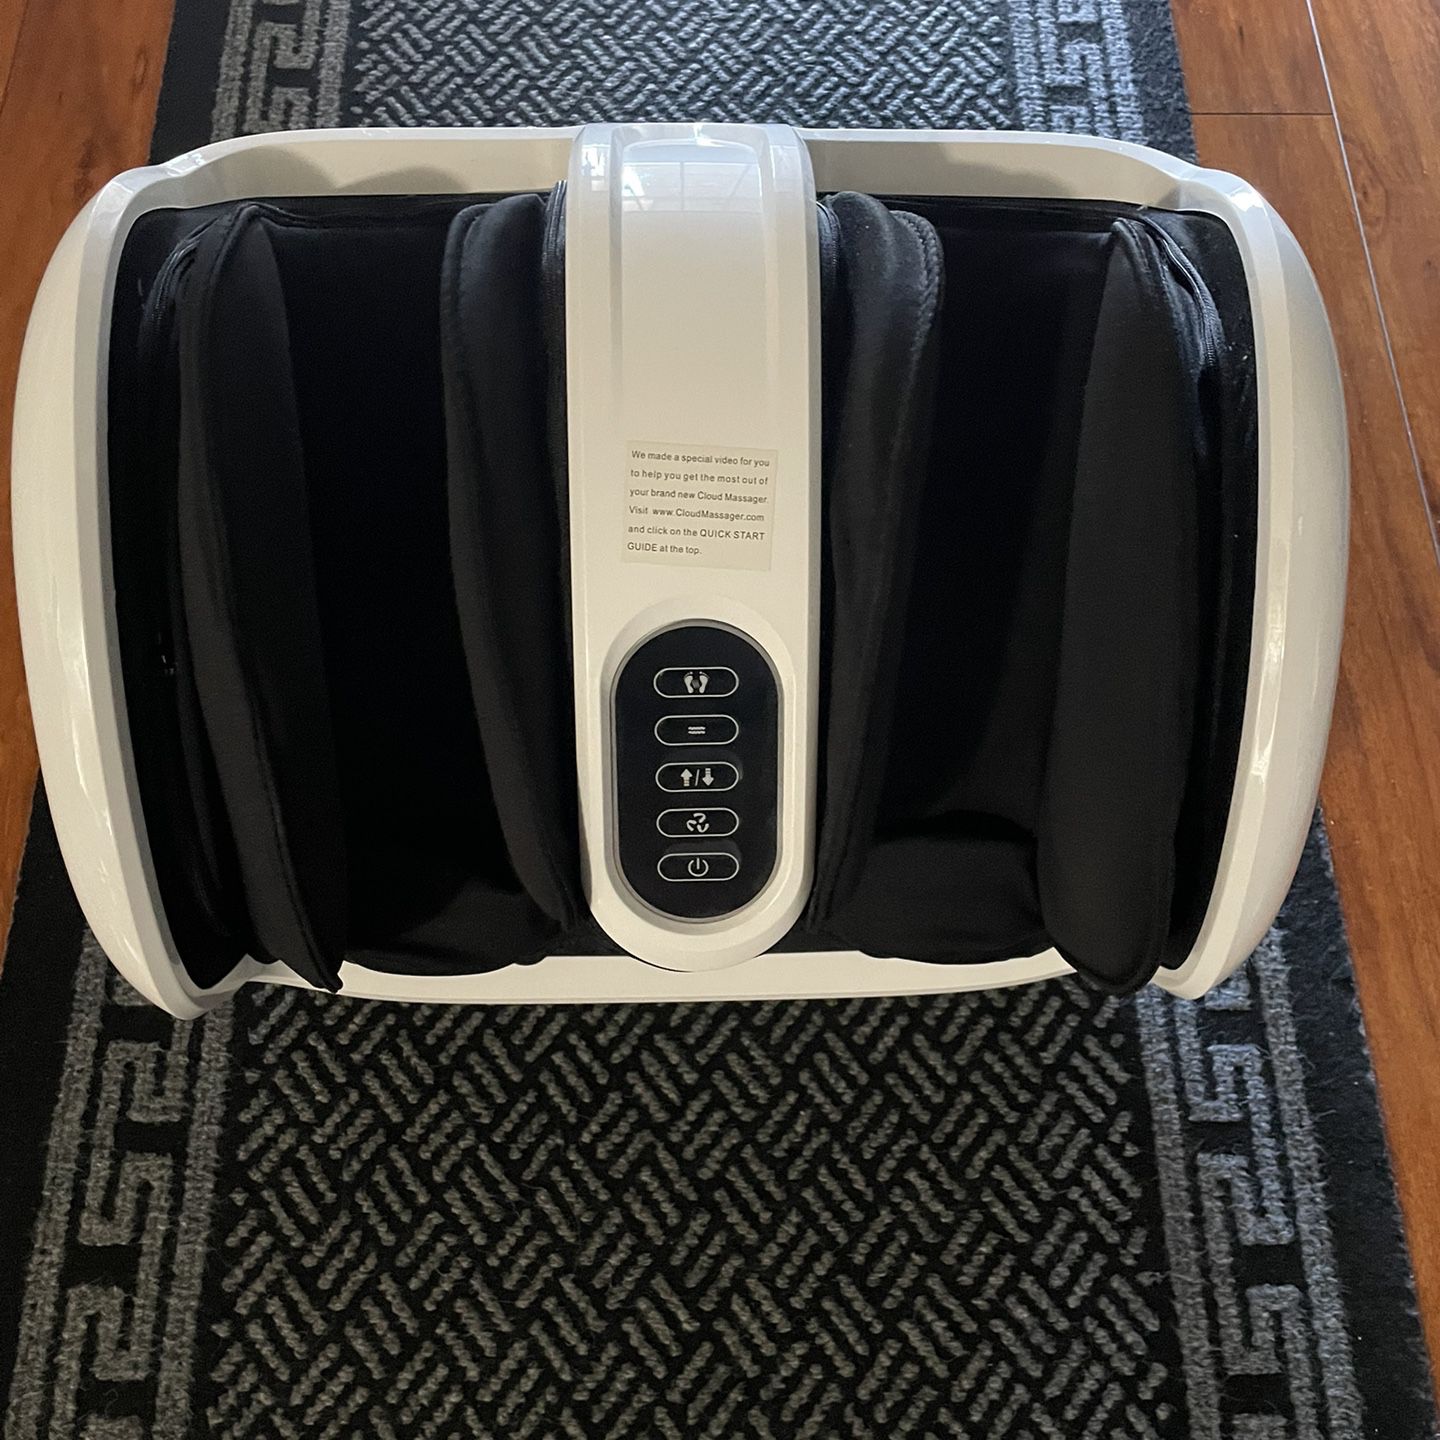 Trumedic Foot massager for Sale in Weymouth, MA - OfferUp